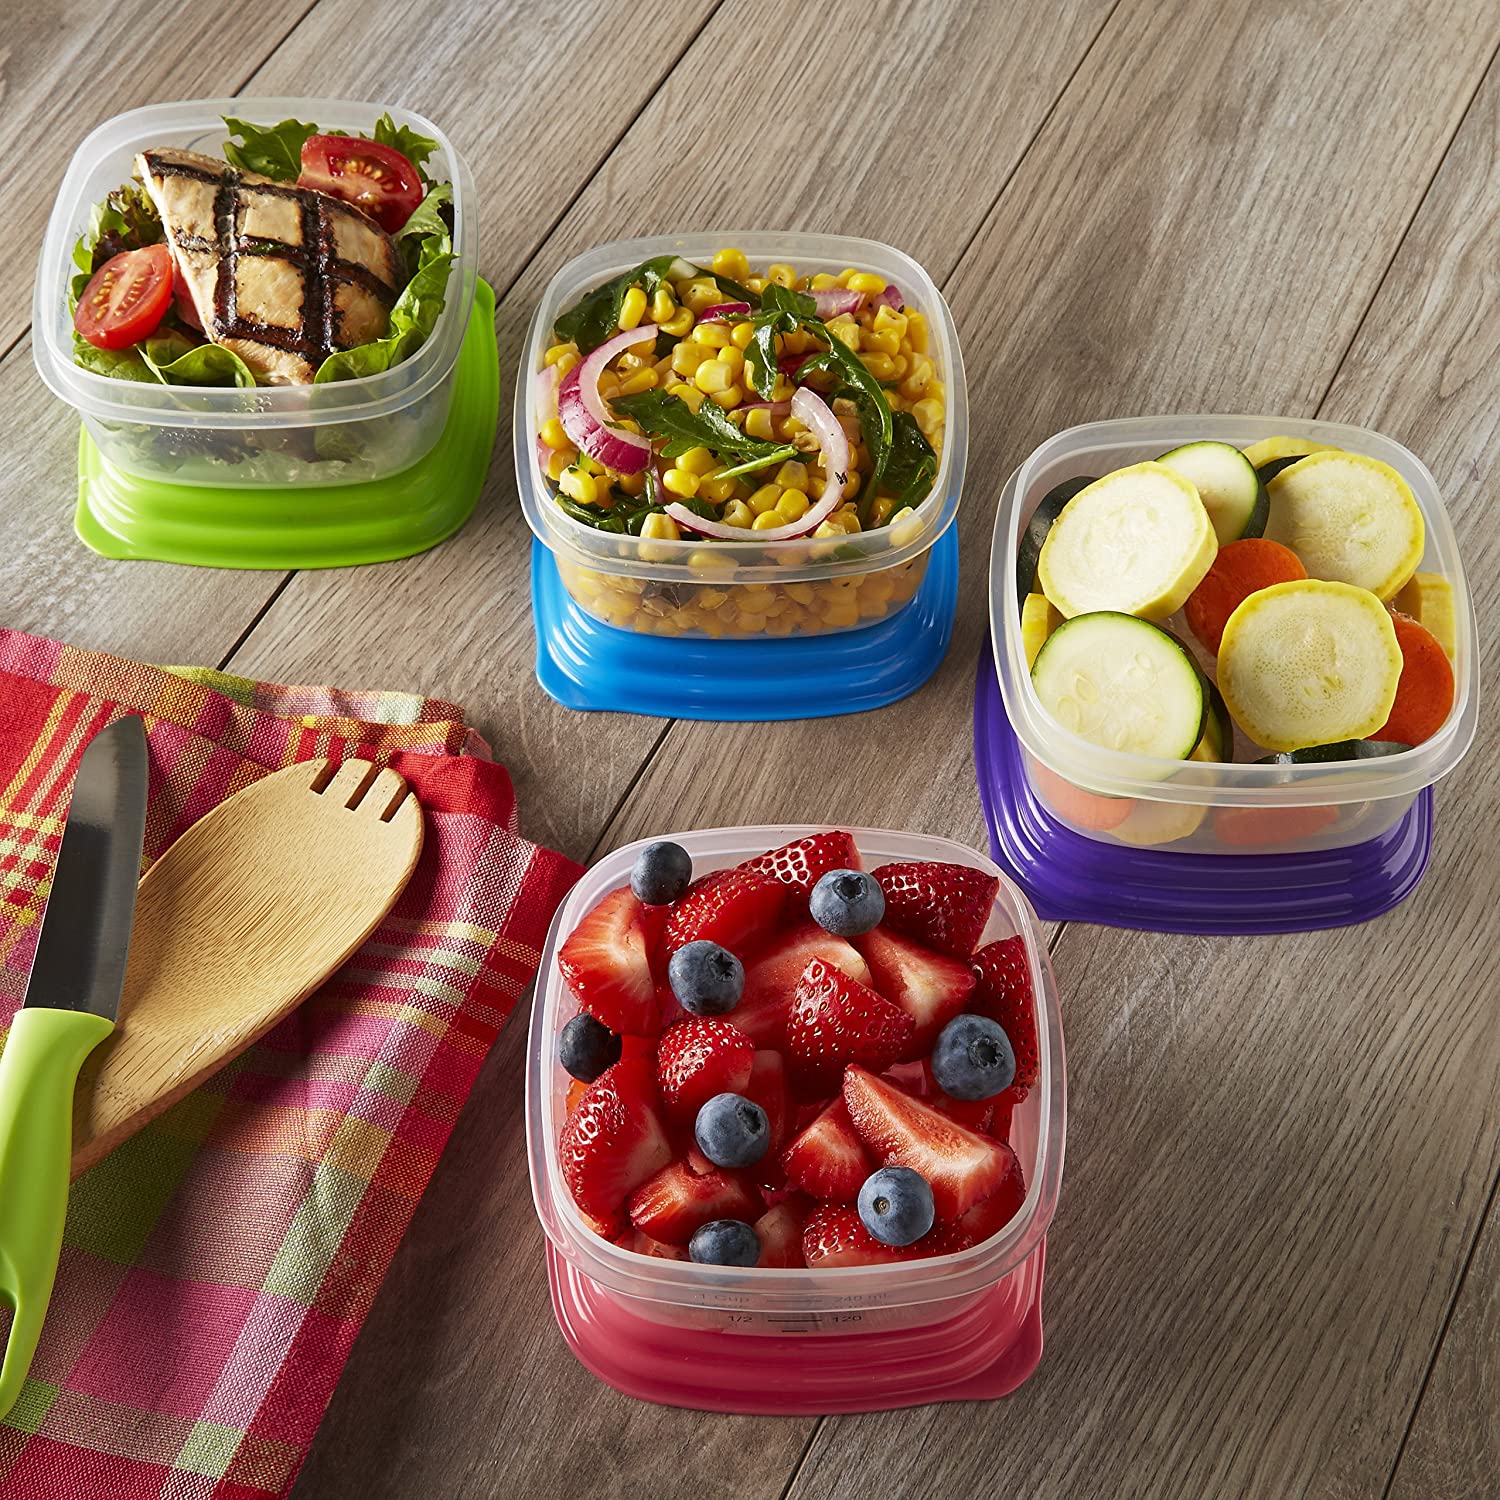 Fit & Fresh Stak Pak Portion Control 1-Cup Container Set, 4 BPA-Free Reusable Food Storage Containers and Ice Packs, Healthy Lunch and Snack for School/Work